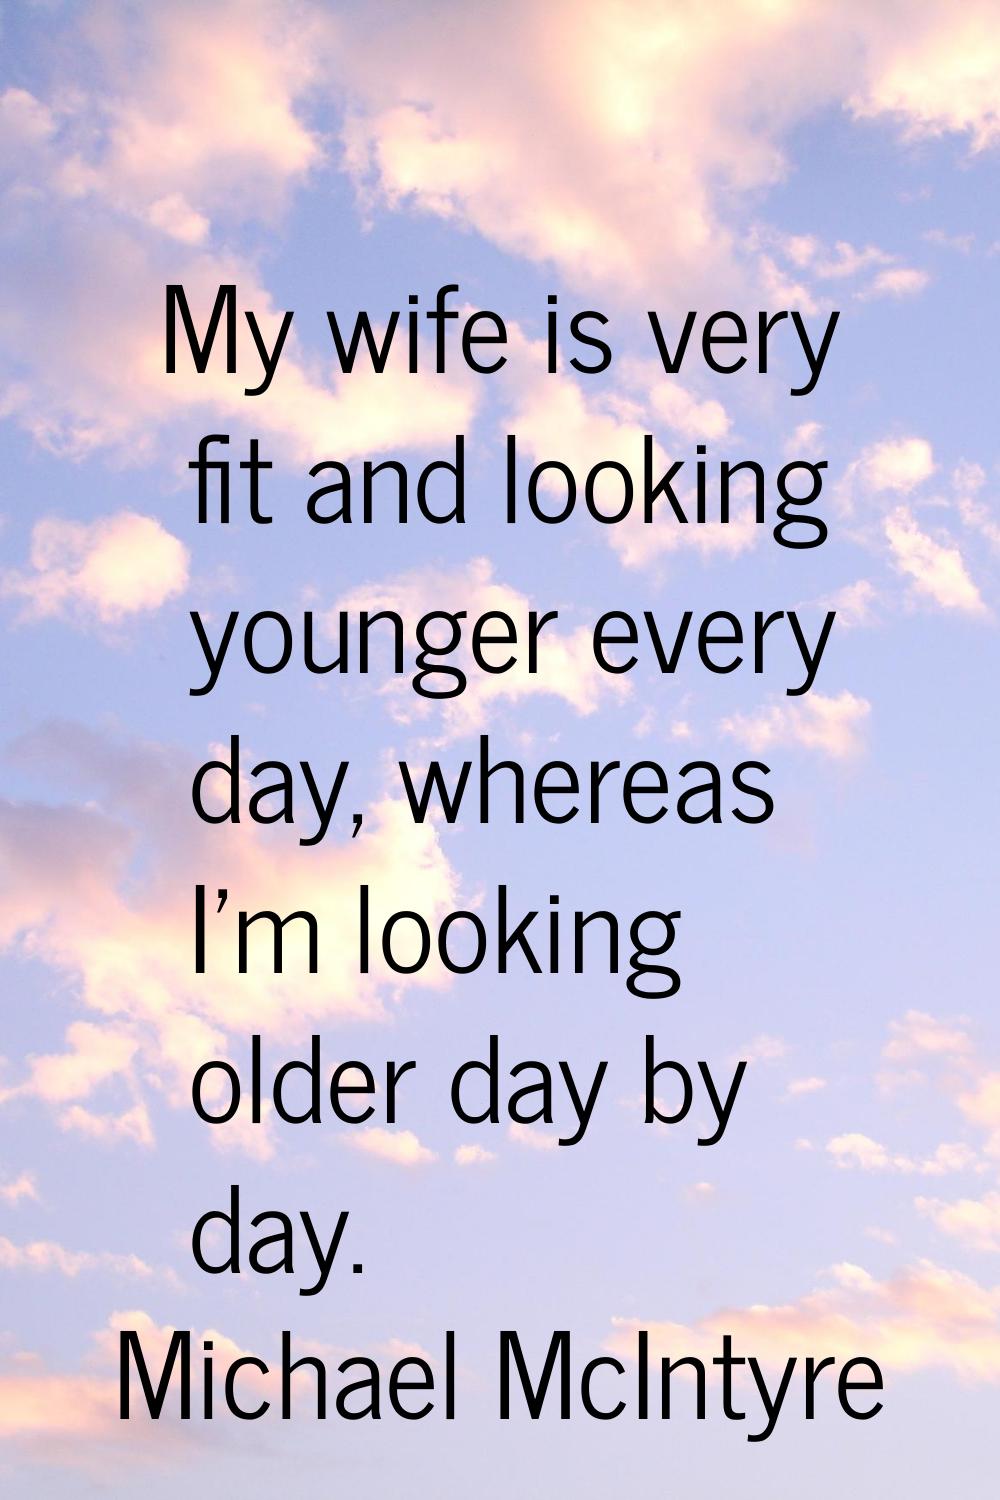 My wife is very fit and looking younger every day, whereas I'm looking older day by day.